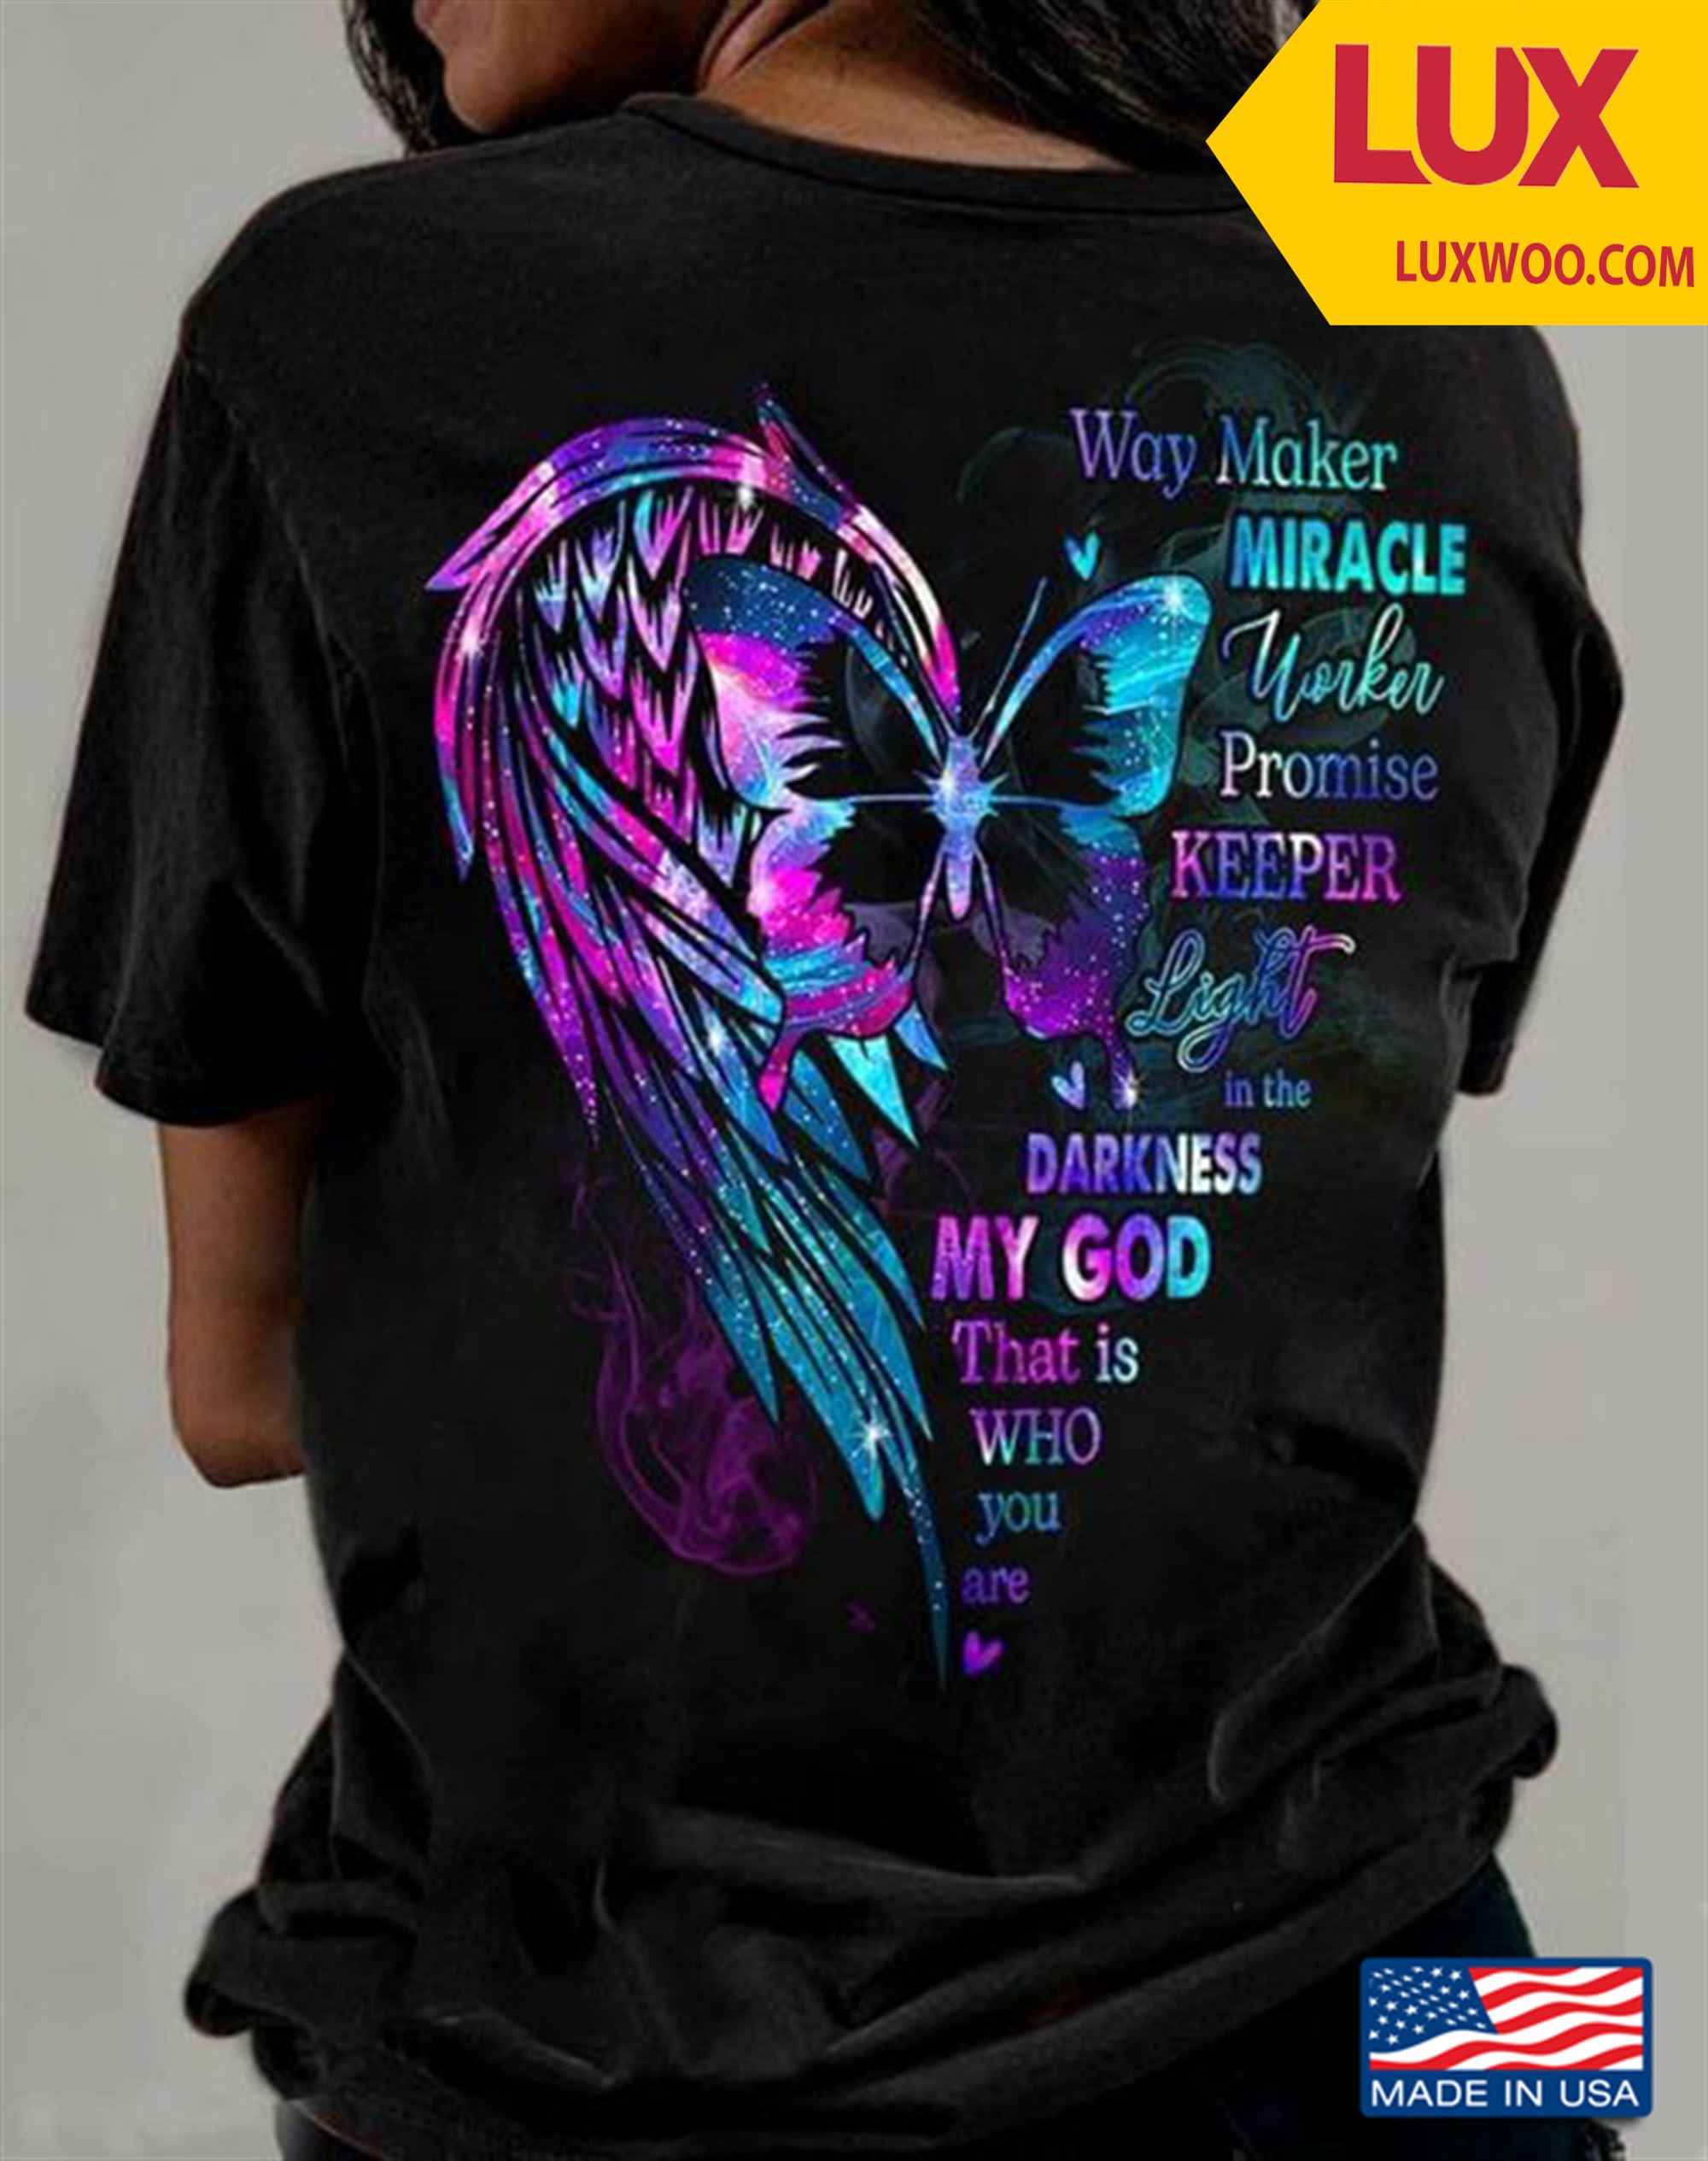 Way Maker Miracle Worker Promise Keeper Light In The Darkness My God That Is Who You Are Tshirt Size Up To 5xl